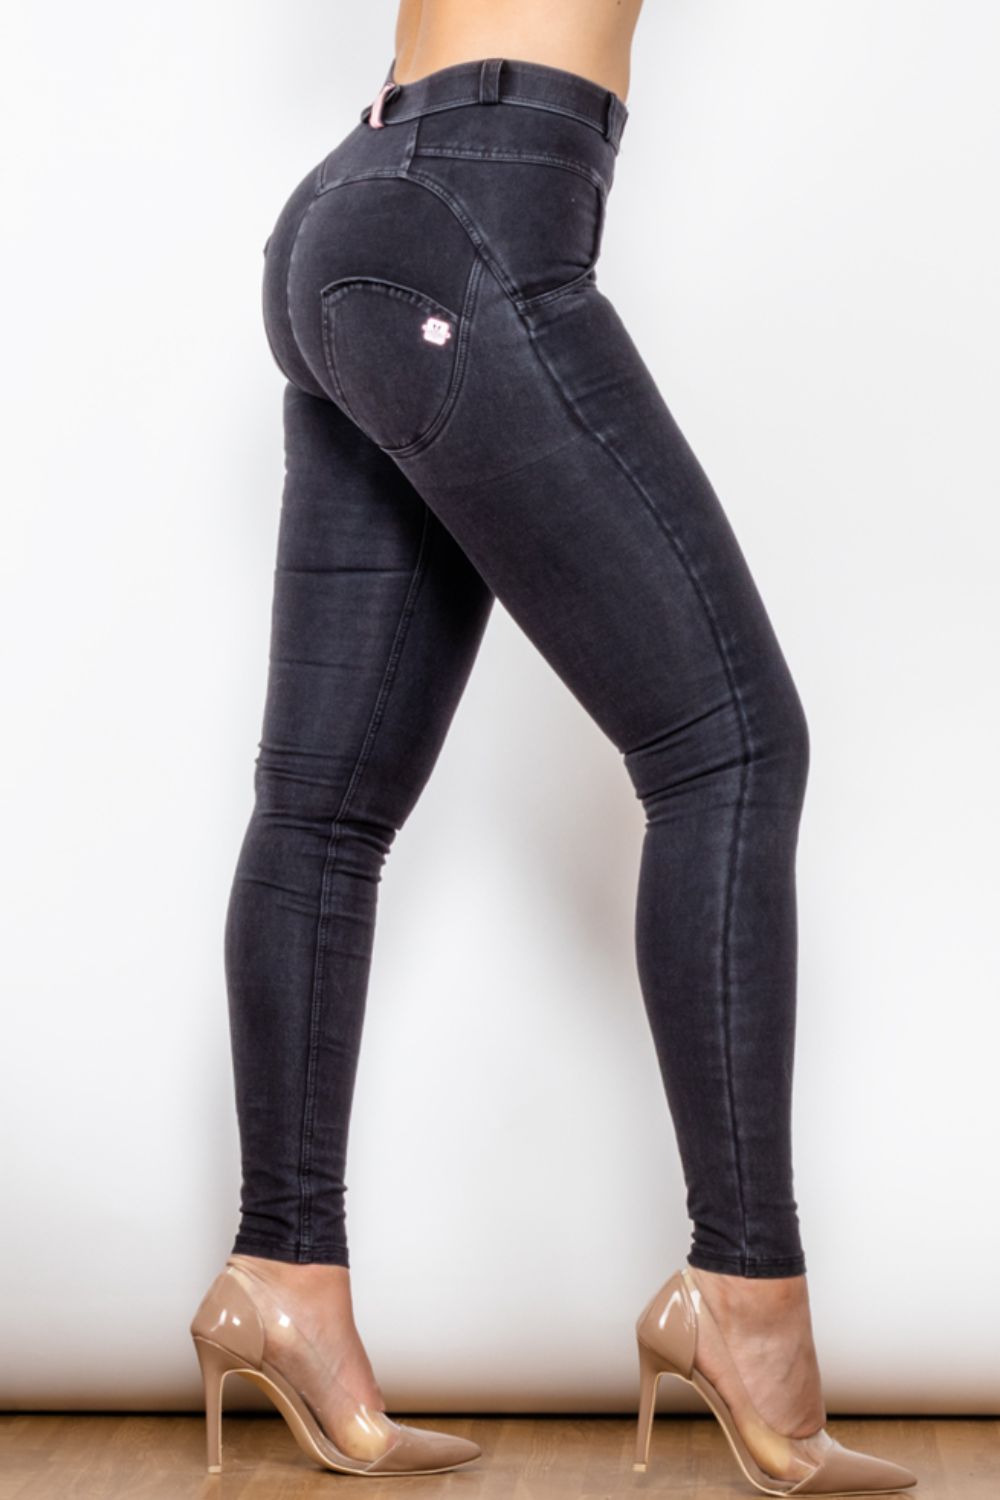 Buttoned Skinny Long Jeans - Shimmery Black